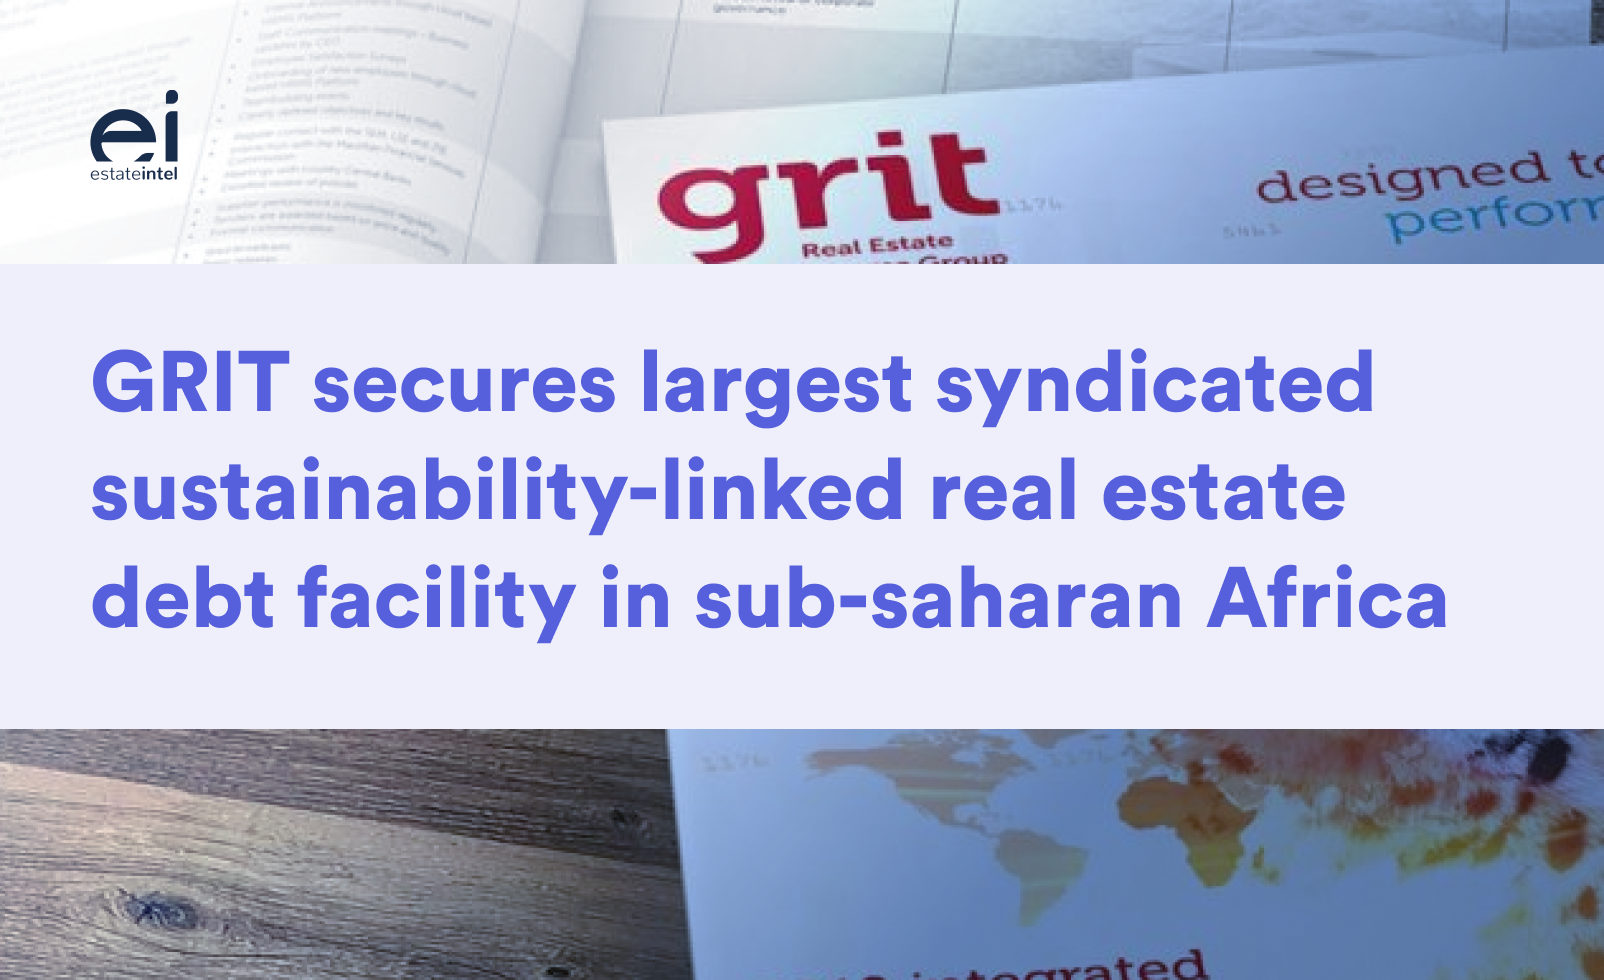 Grit Secures Largest Syndicated Sustainability-Linked Real Estate Debt Facility in Sub-Saharan Africa